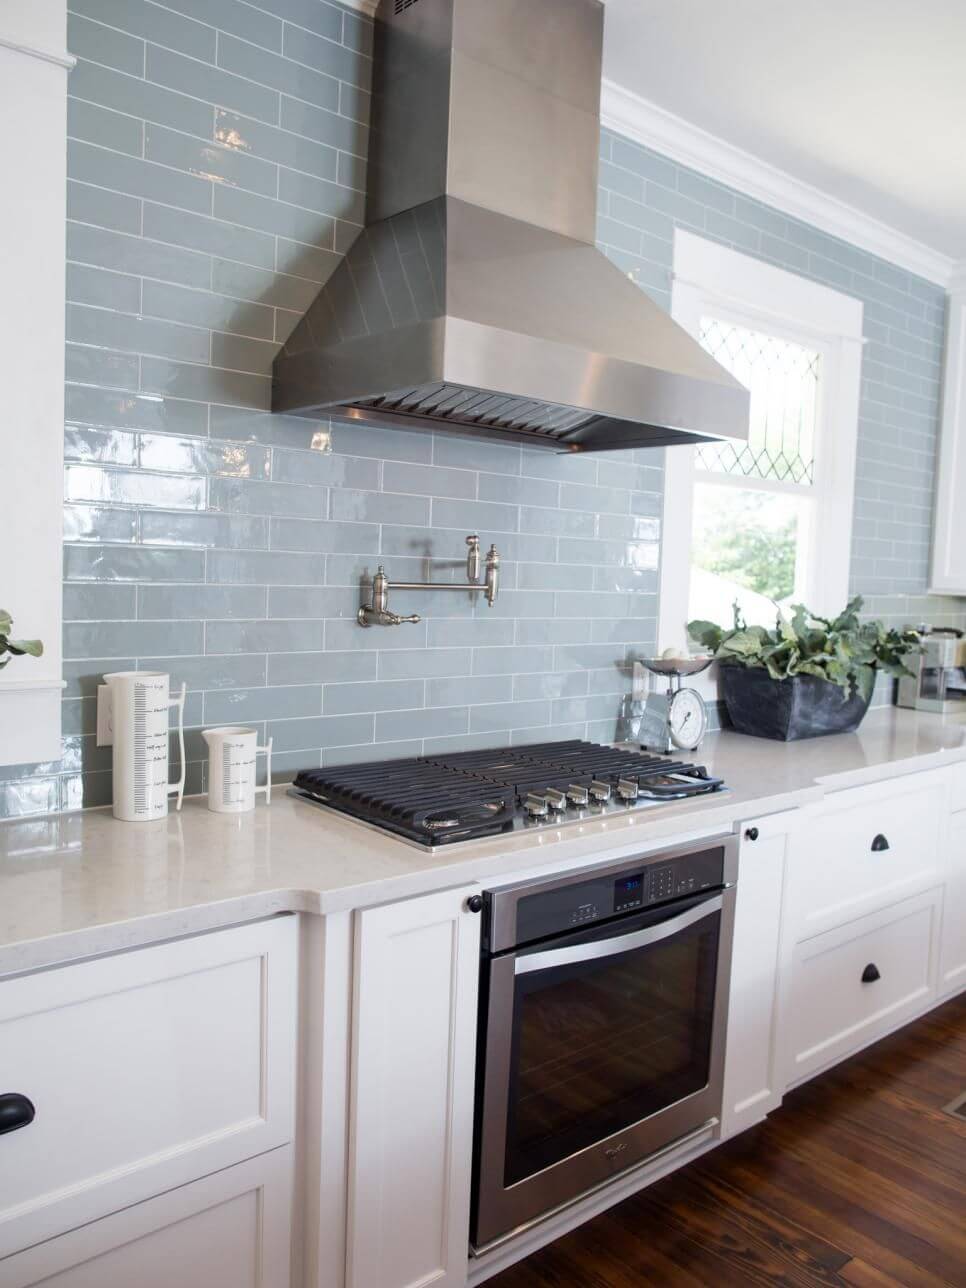 Subway tile in muted blue